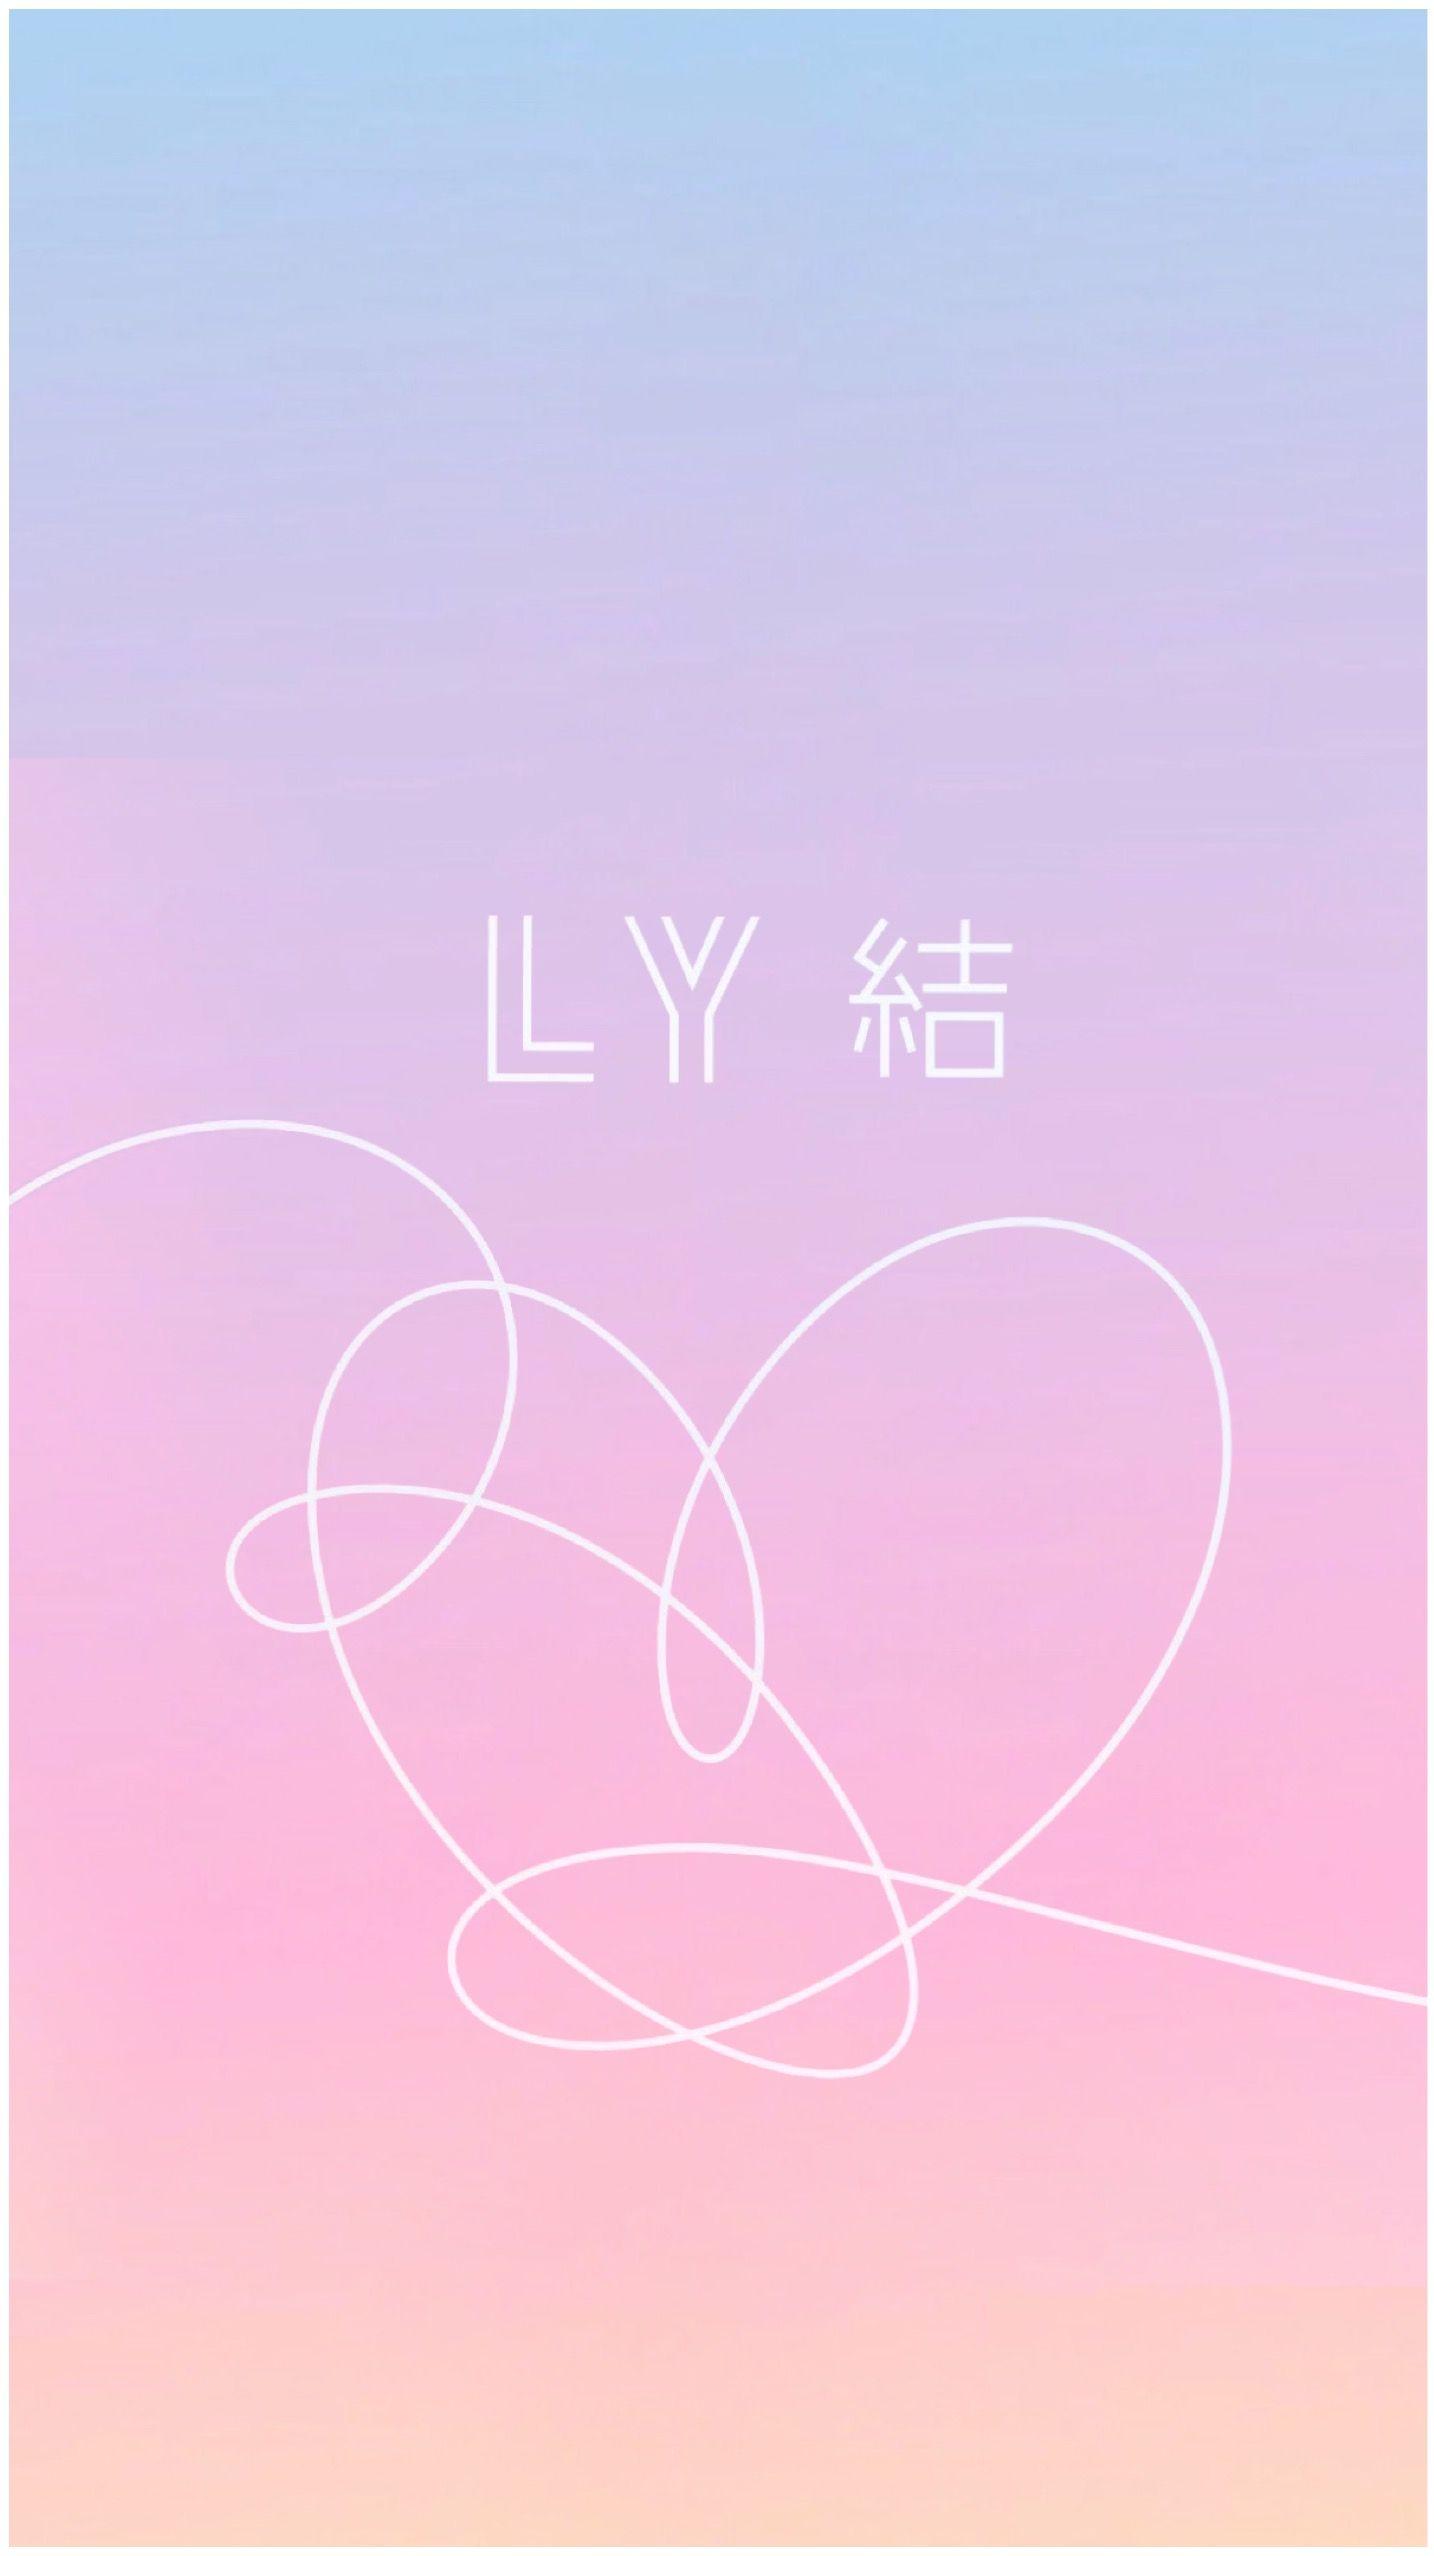 Share Your BTS Phone Background Wallpaper!